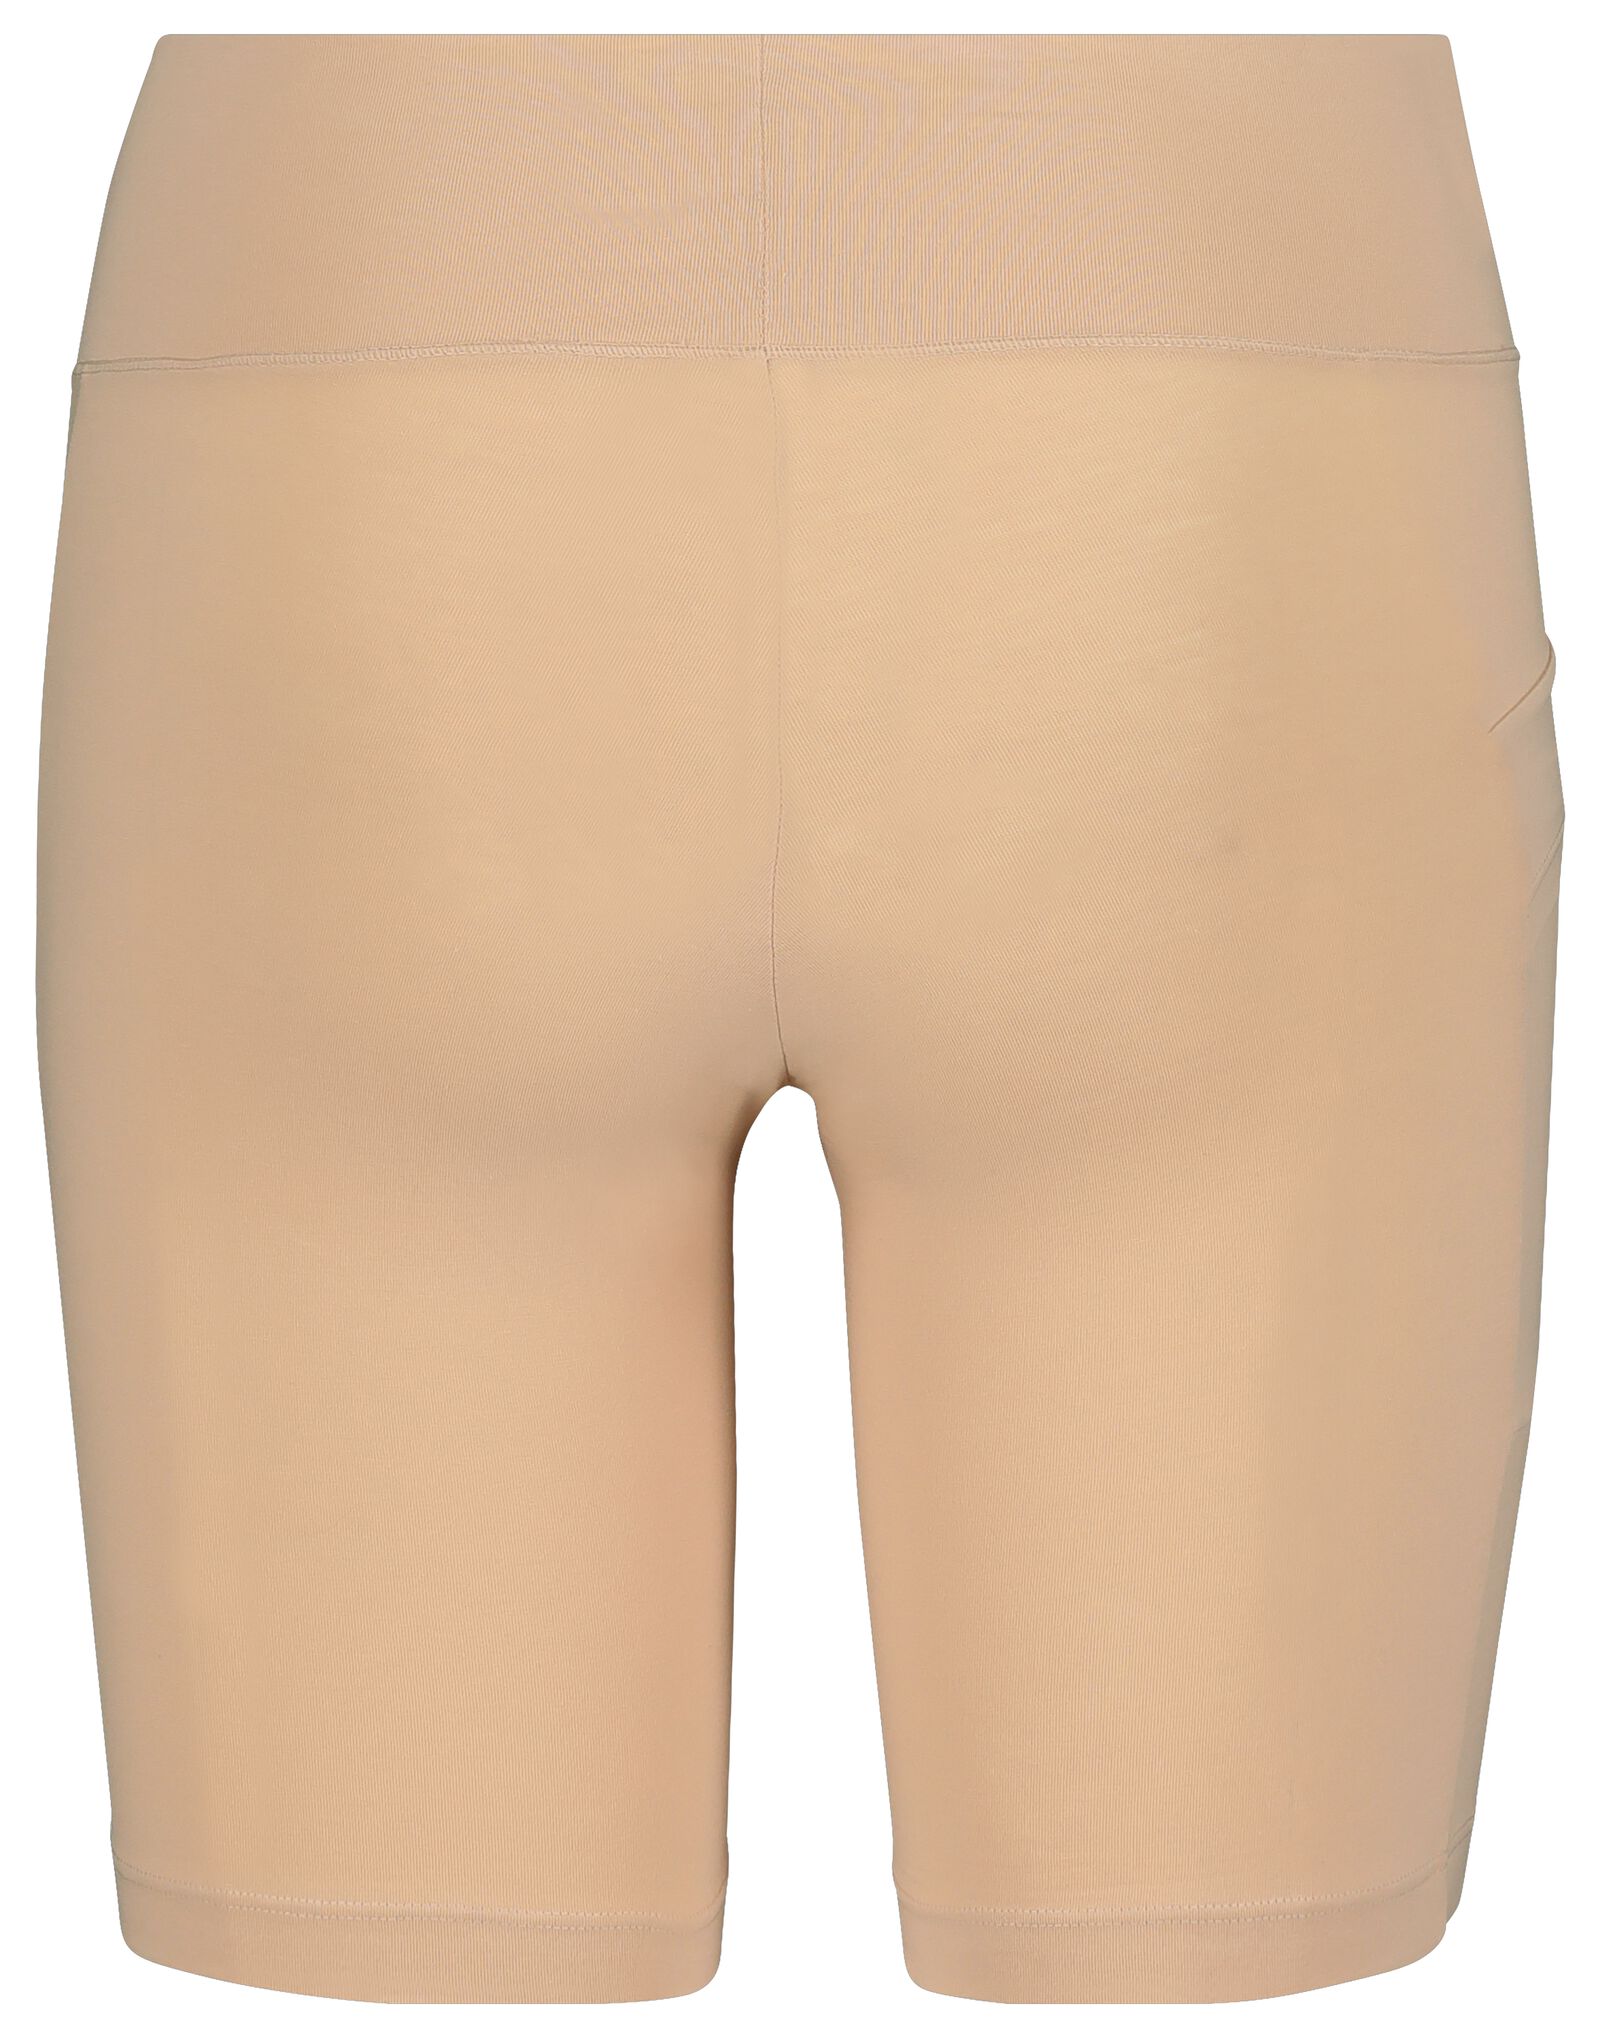 cycliste femme real lasting cotton beige S - 19606171 - HEMA